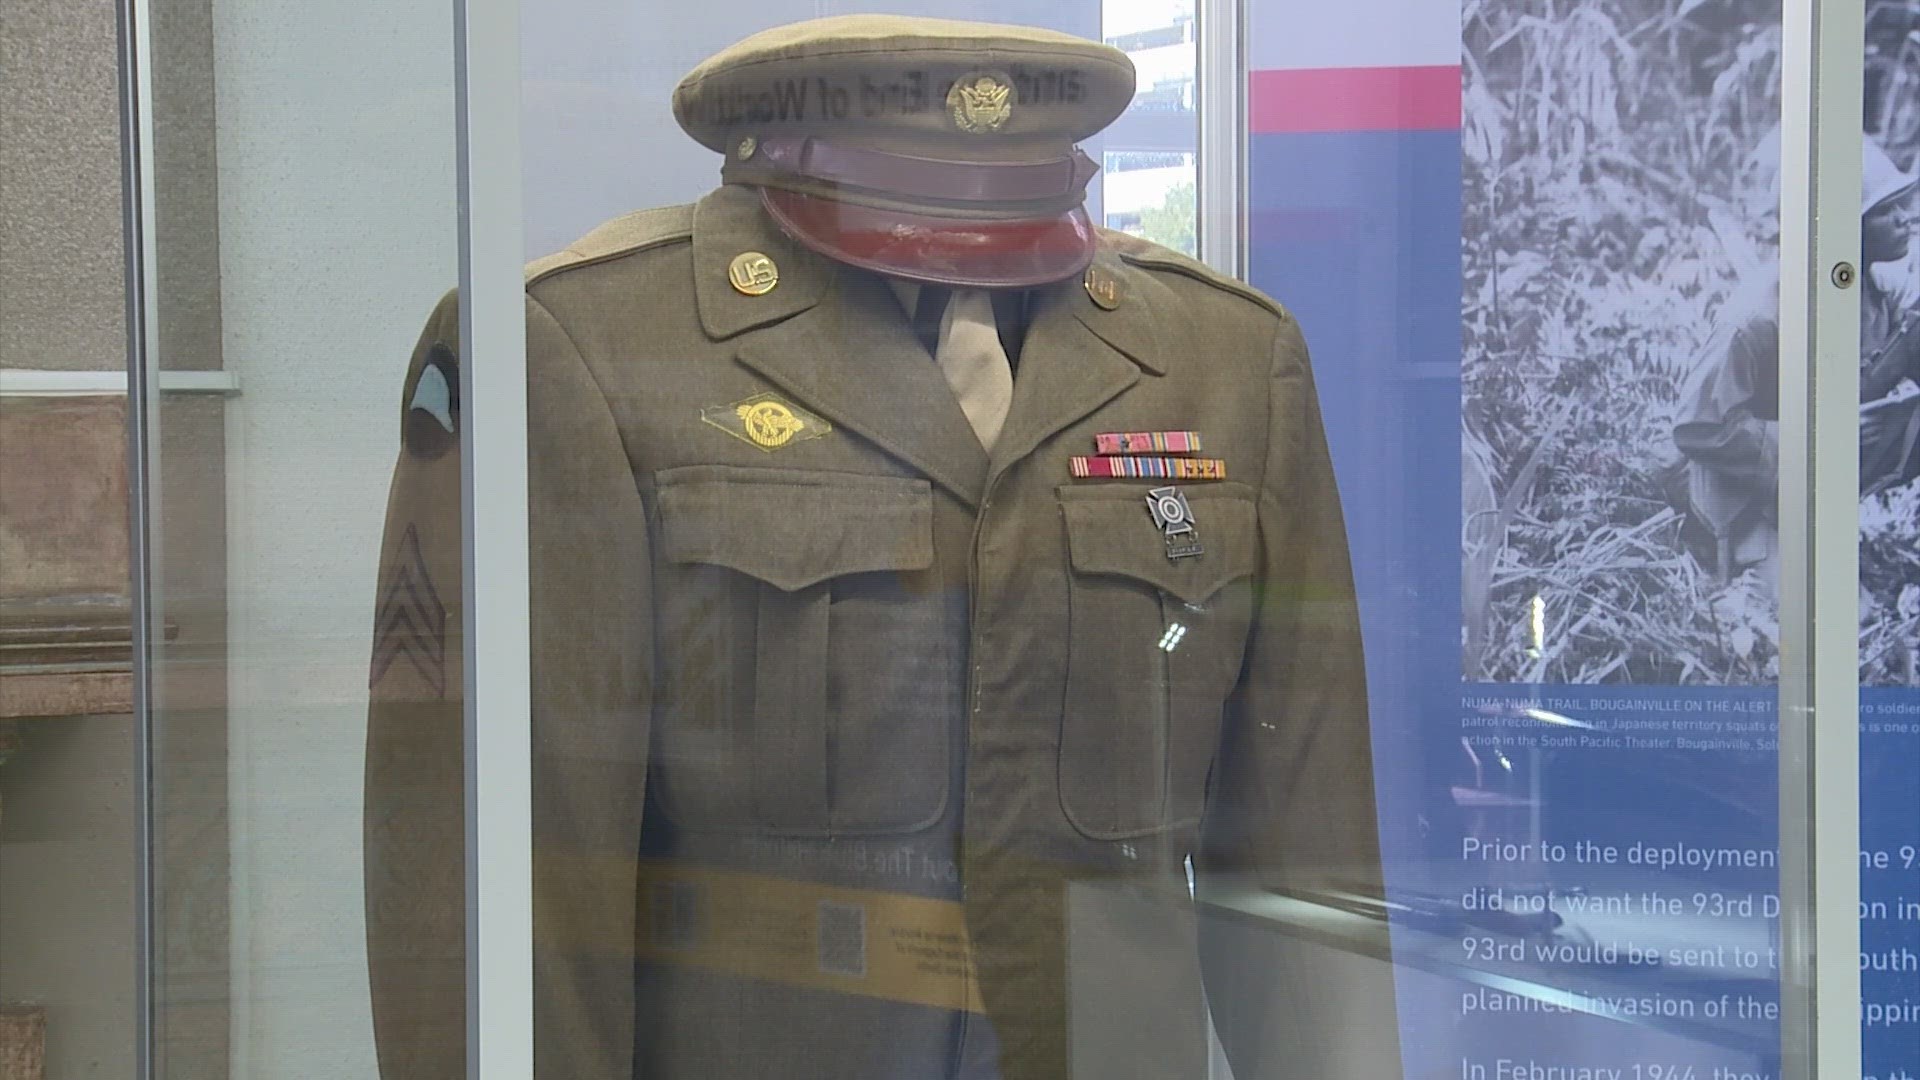 The new exhibit highlights the roles of African-American military personnel and peace-keeping missions.